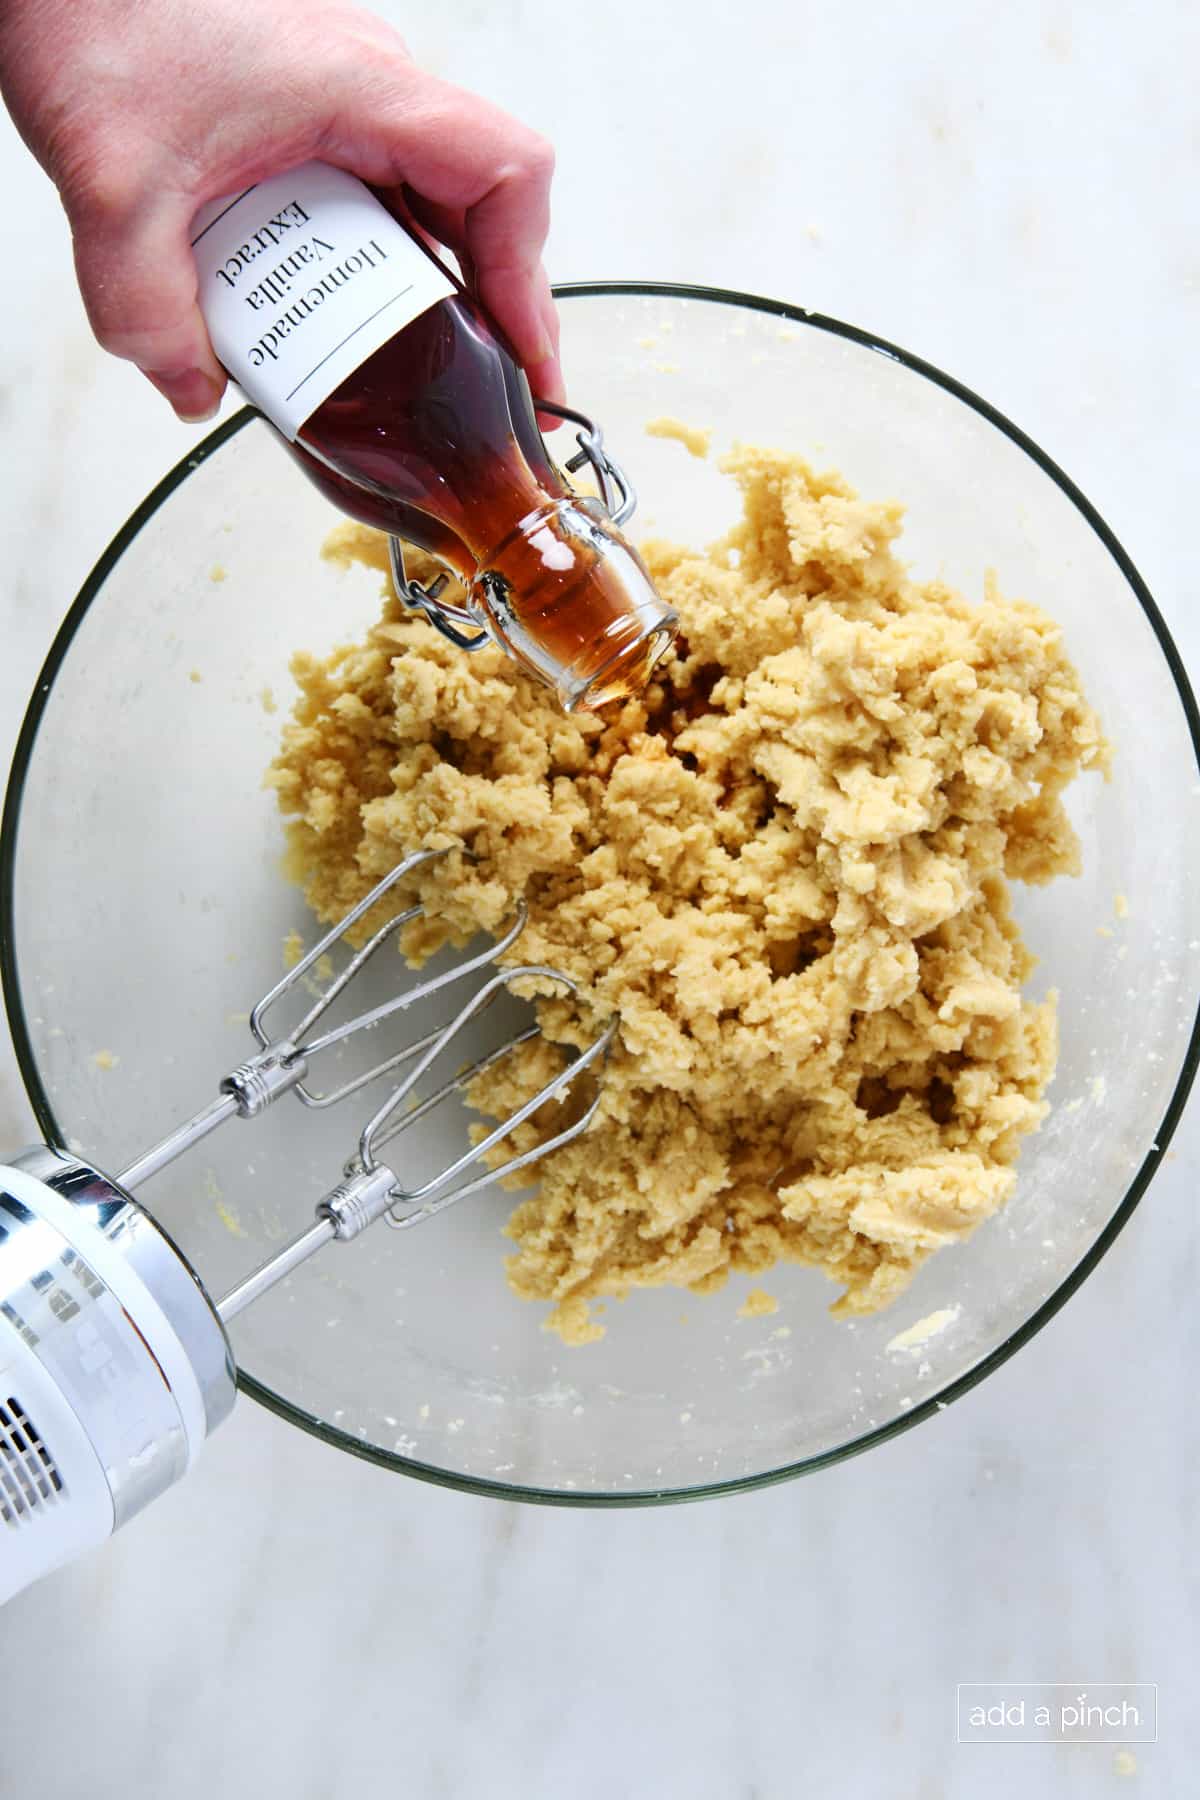 Vanilla extract being added to cookie dough mixture in a glass bowl with hand mixer.